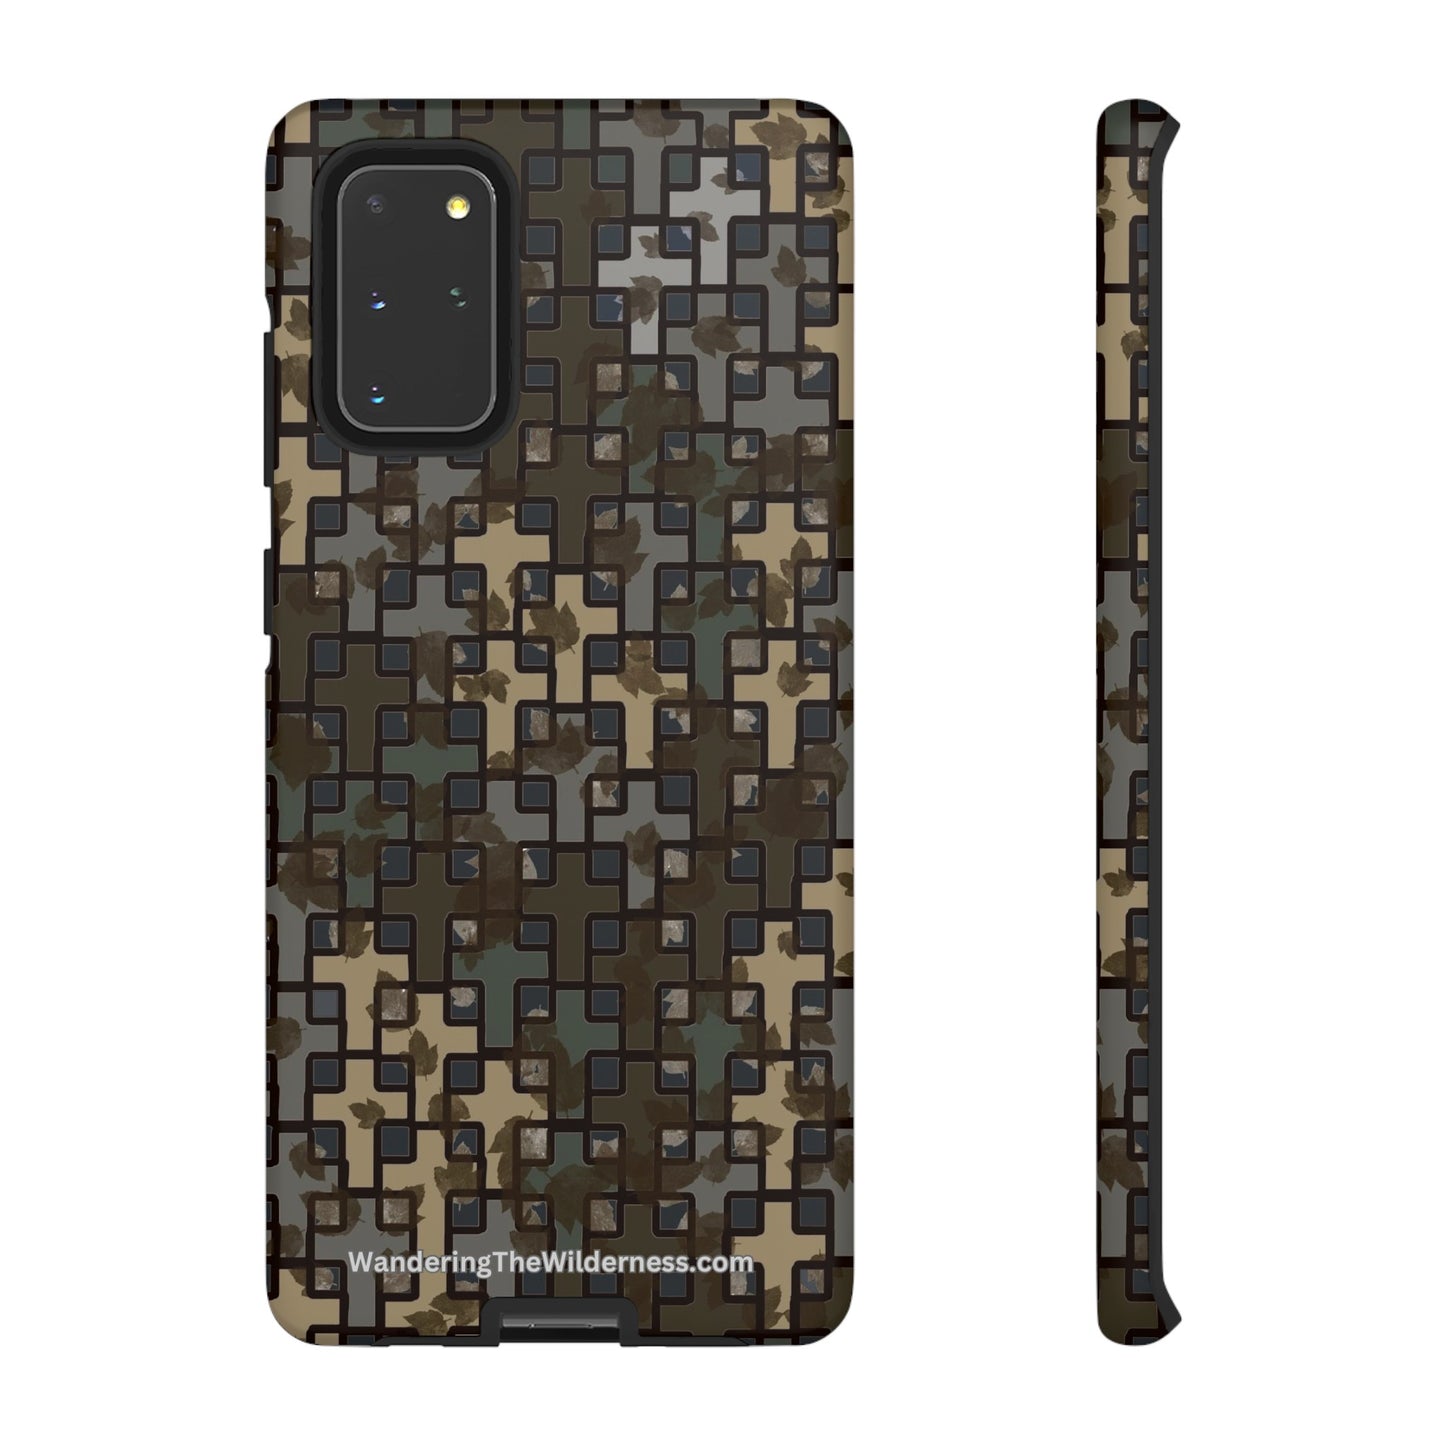 Tough Cases Wandering the Wilderness Stubblefield Camo.